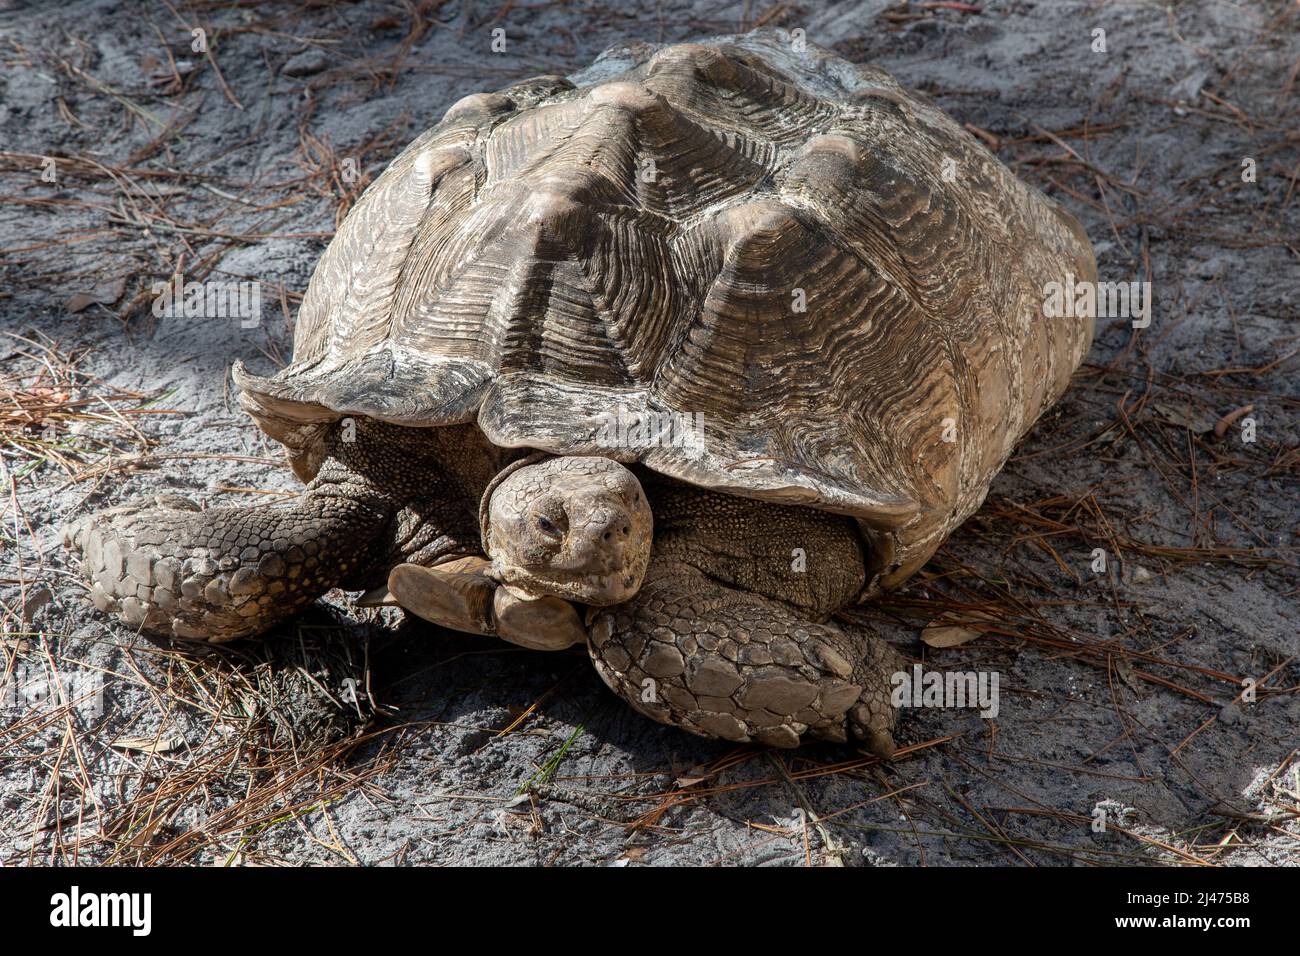 African Spur Thigh Tortoise at Reptile Discovery Center is  largest mainland tortoise Stock Photo